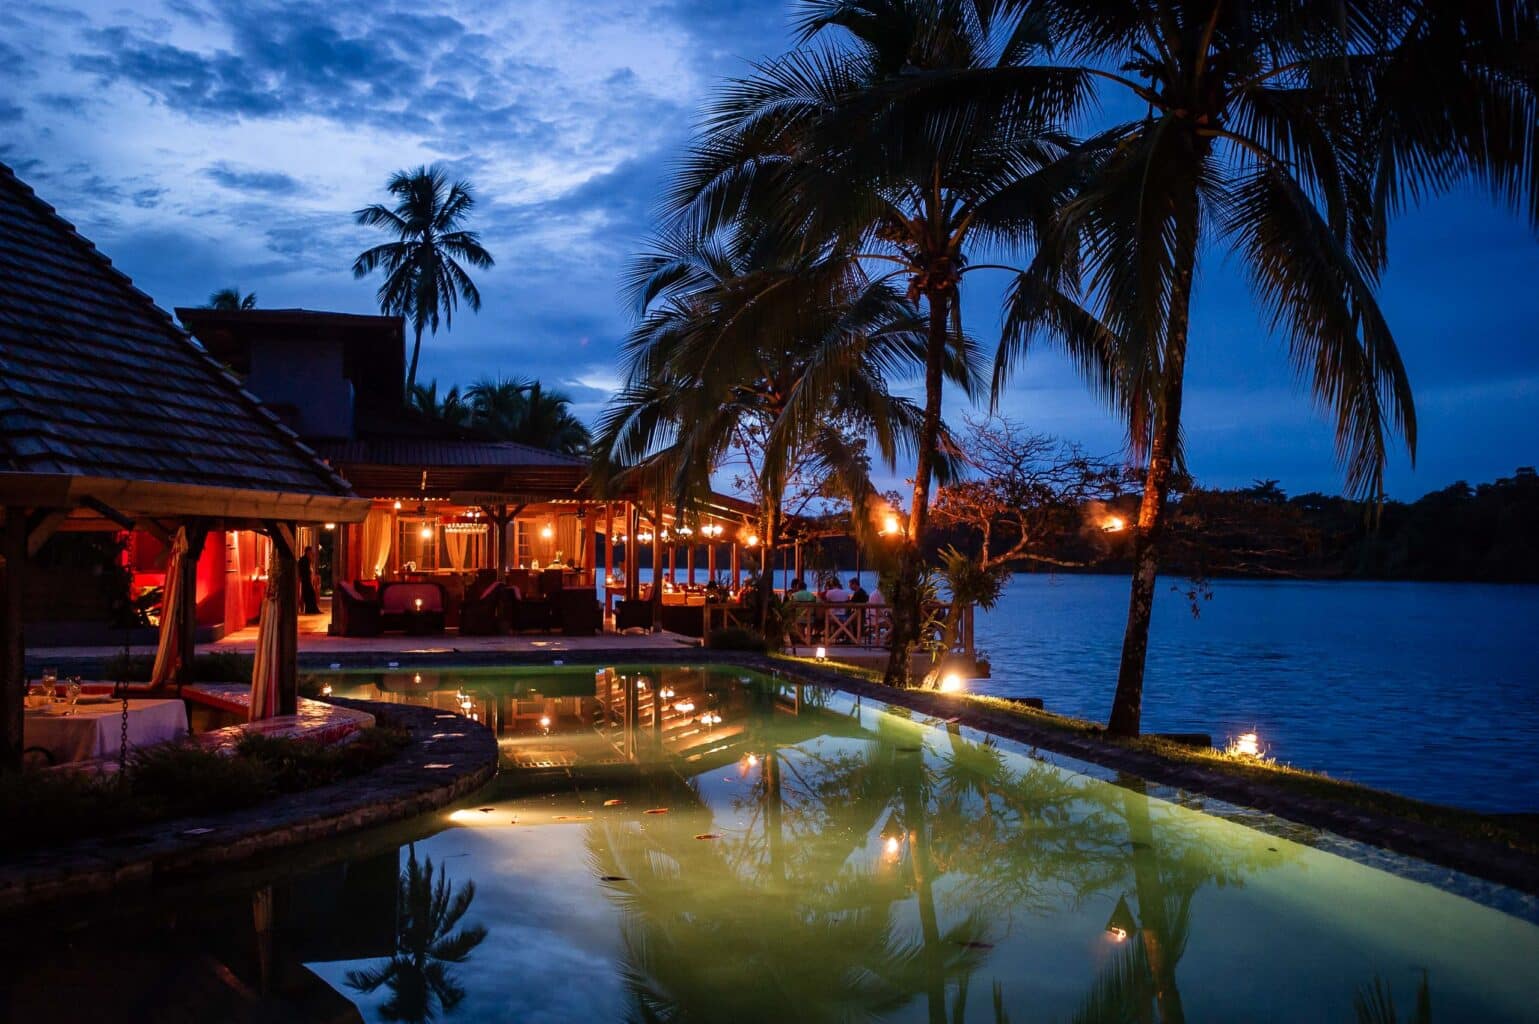 lodge with pool under palm trees next to a lake at dusk.